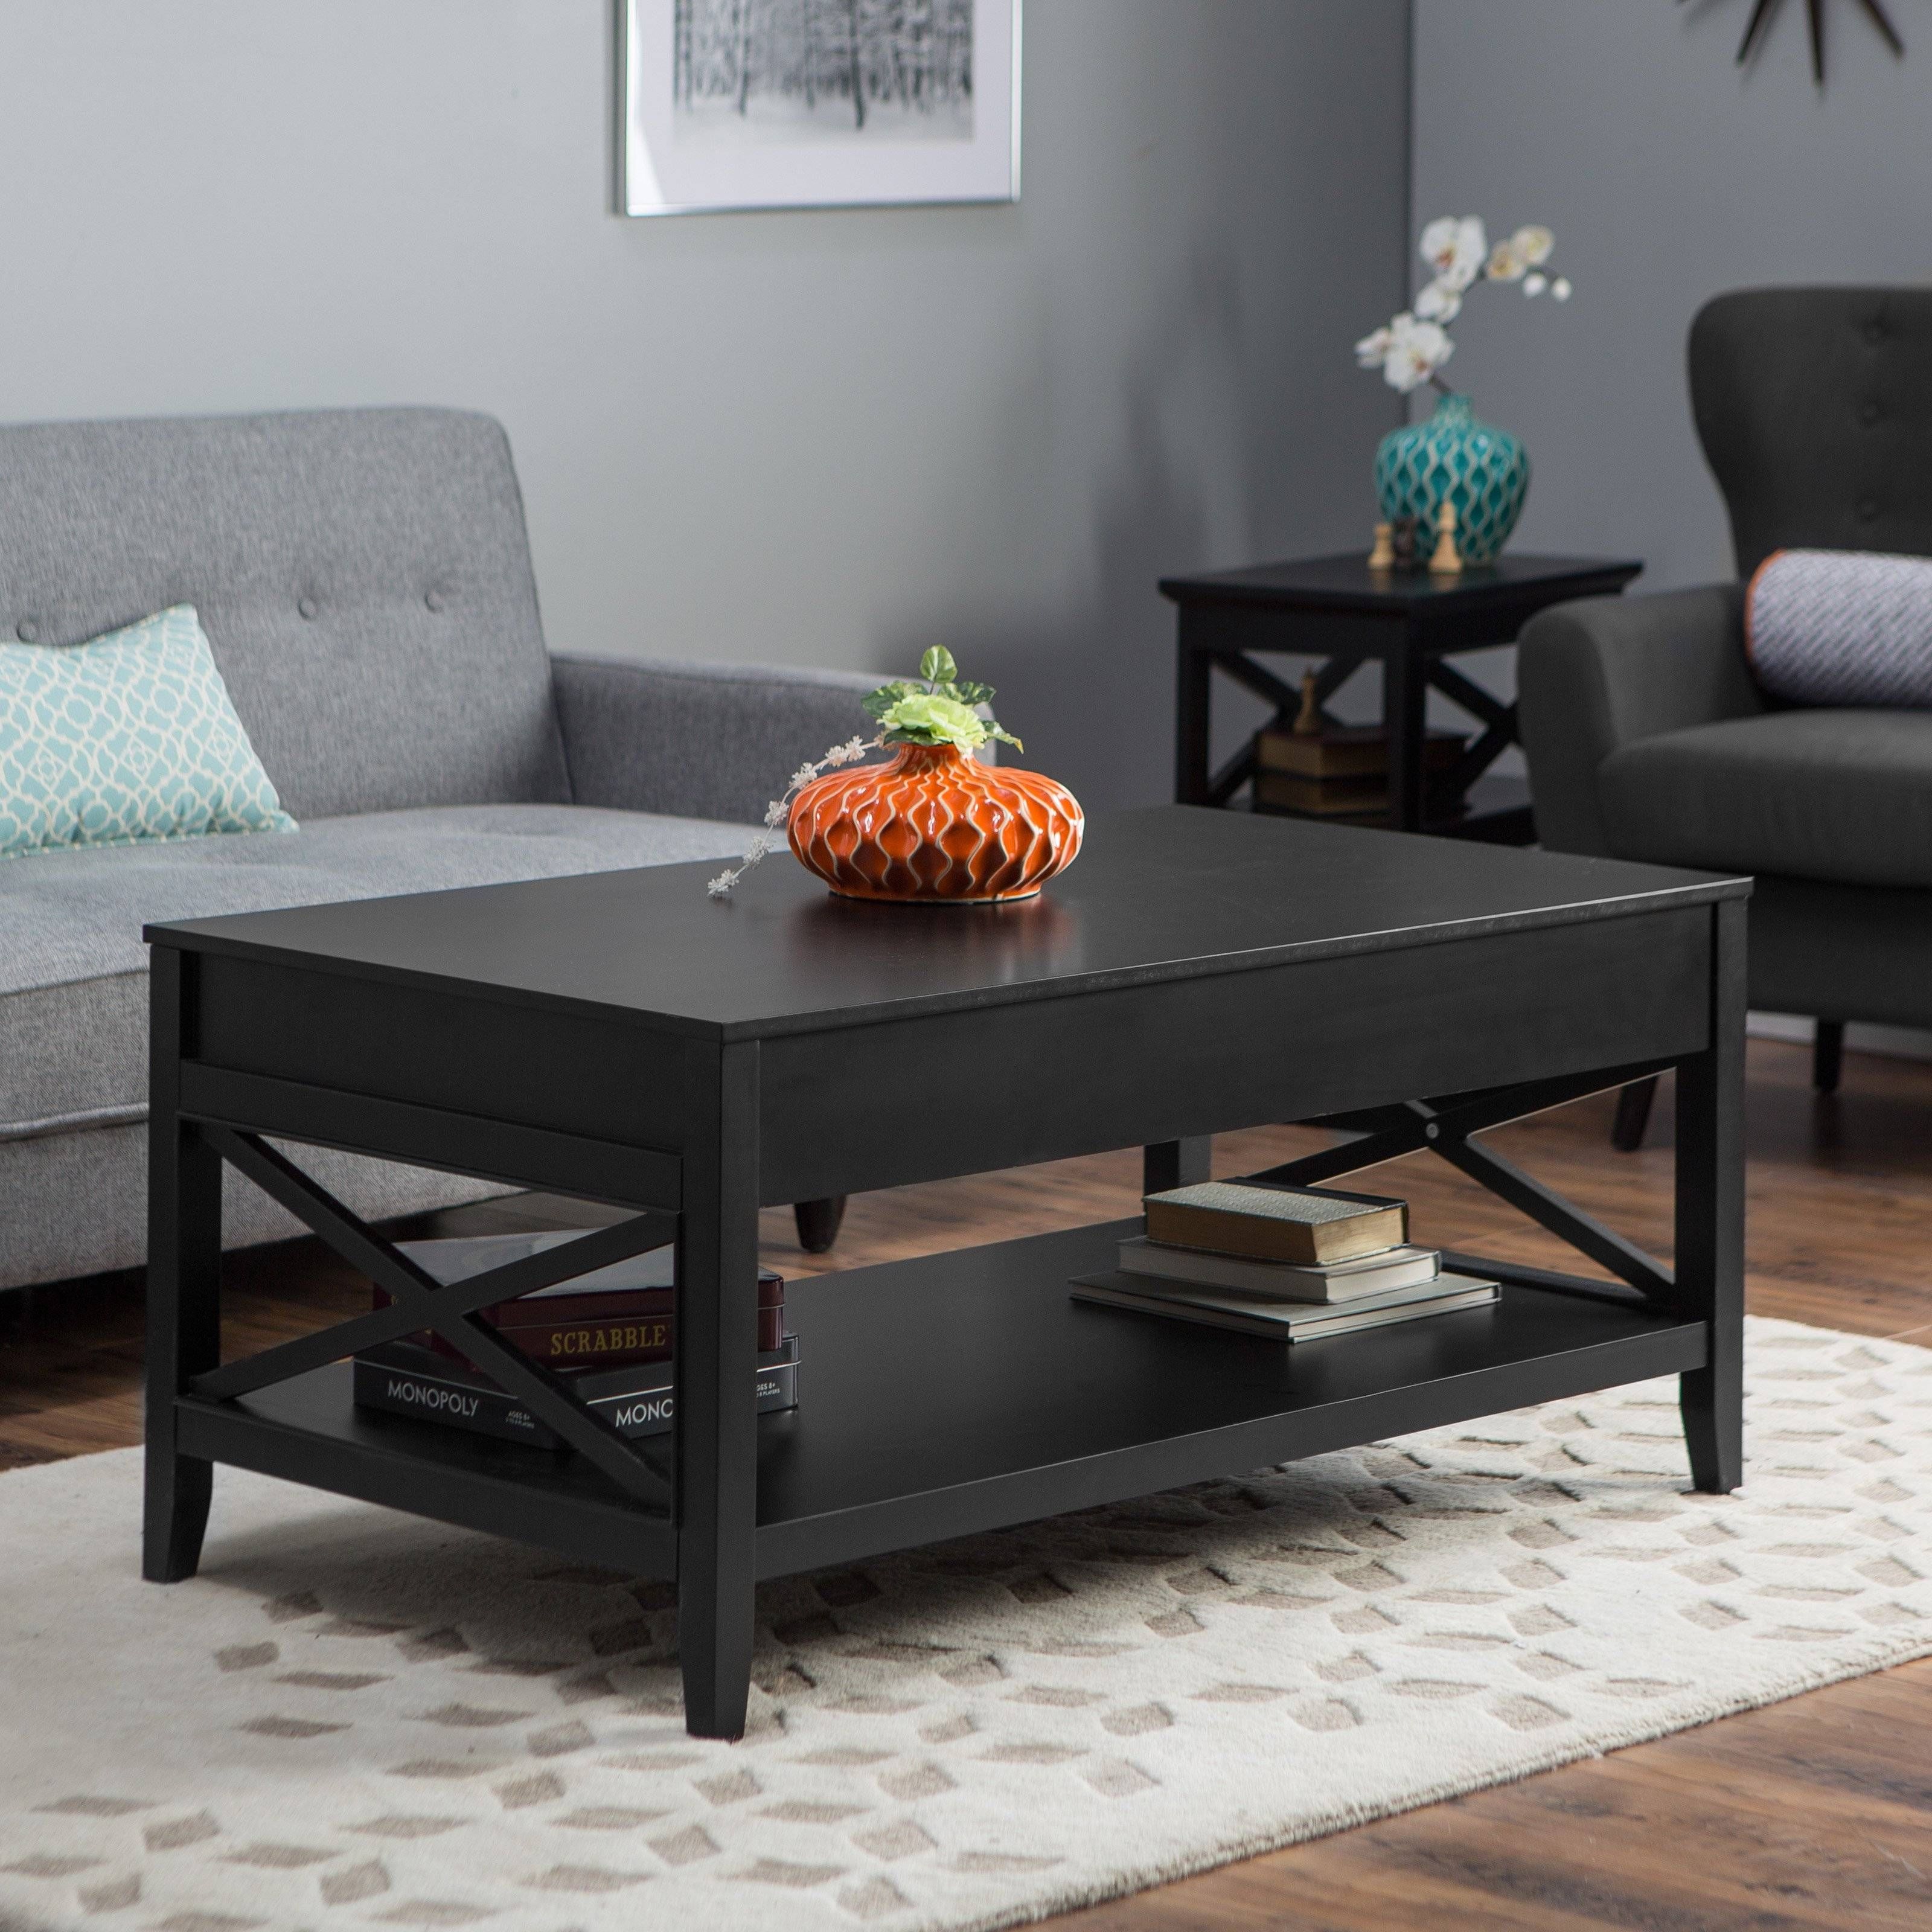 Belham Living Hampton Storage And Lift Top Coffee Table | Hayneedle Intended For Coffee Table With Raised Top (View 22 of 30)